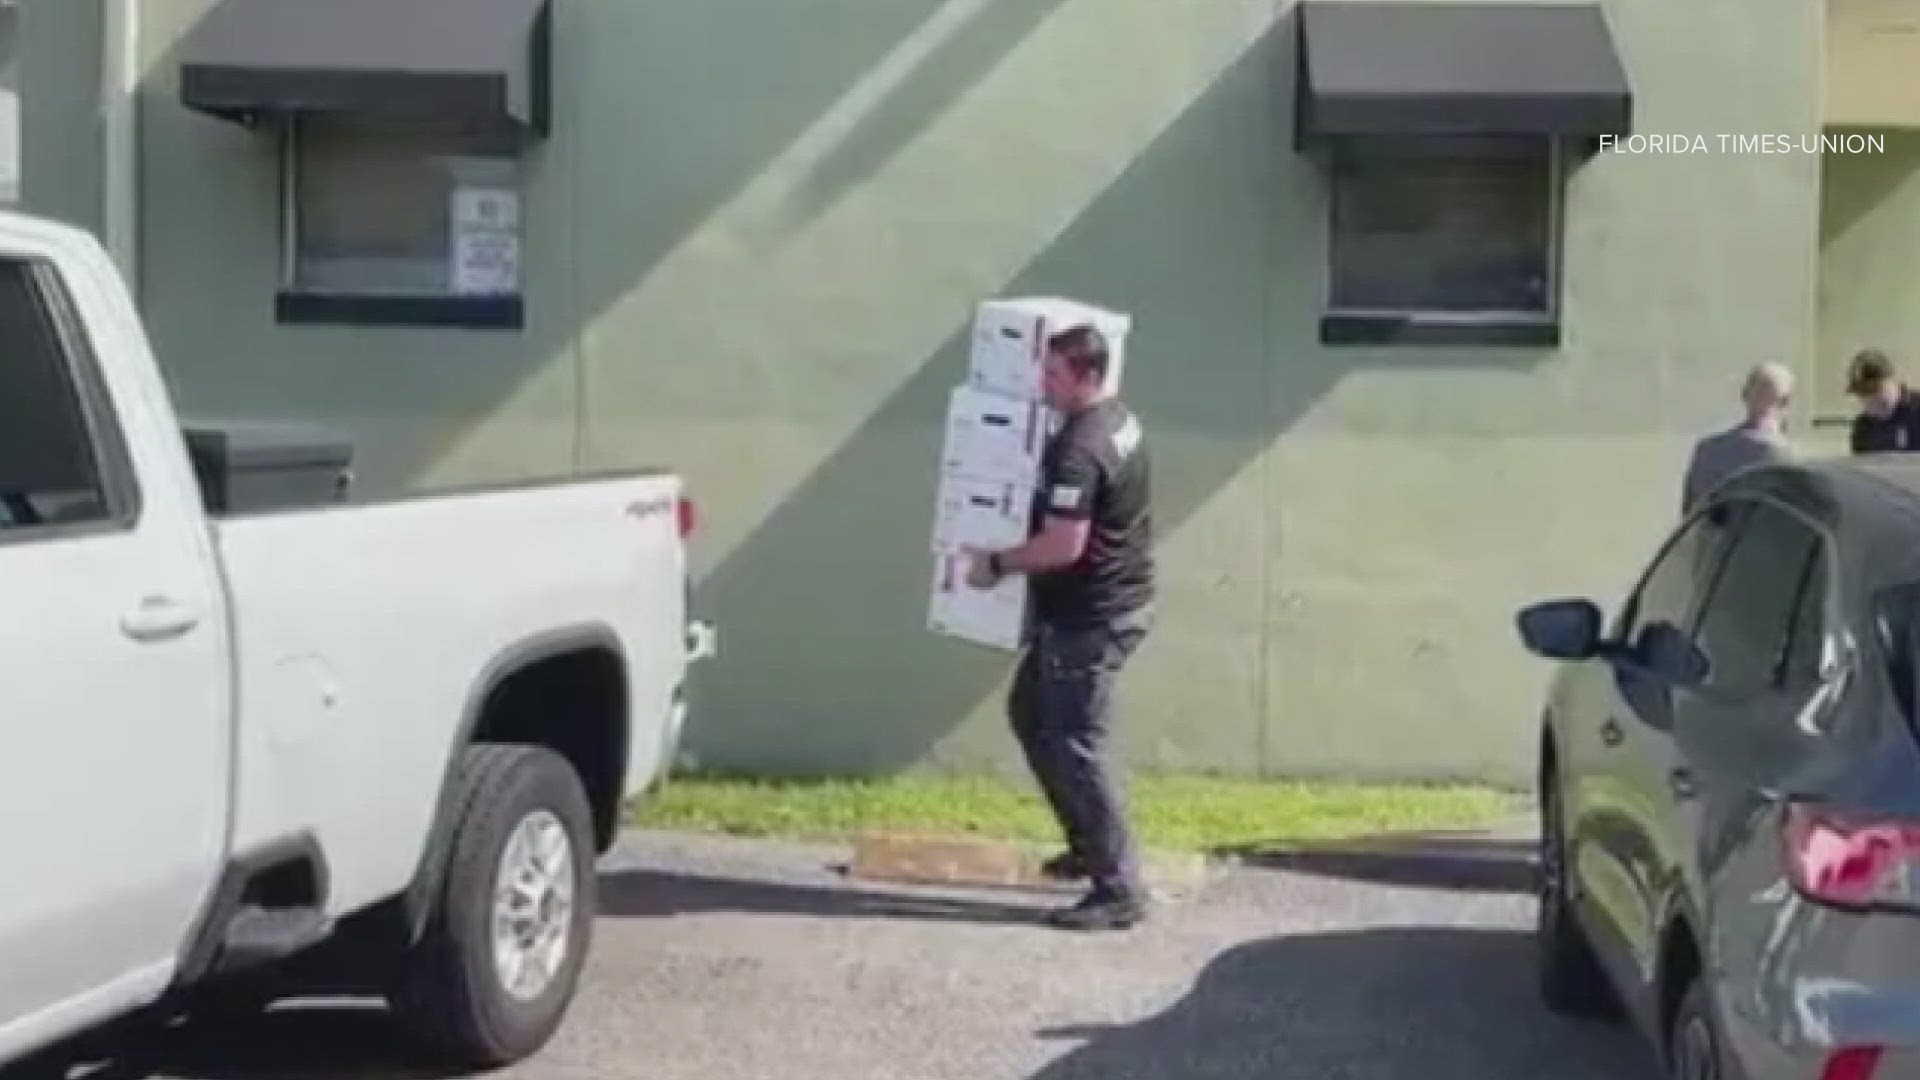 Florida Times-Union reporters witnessed FBI and IRS agents removing boxes from the building Wednesday.